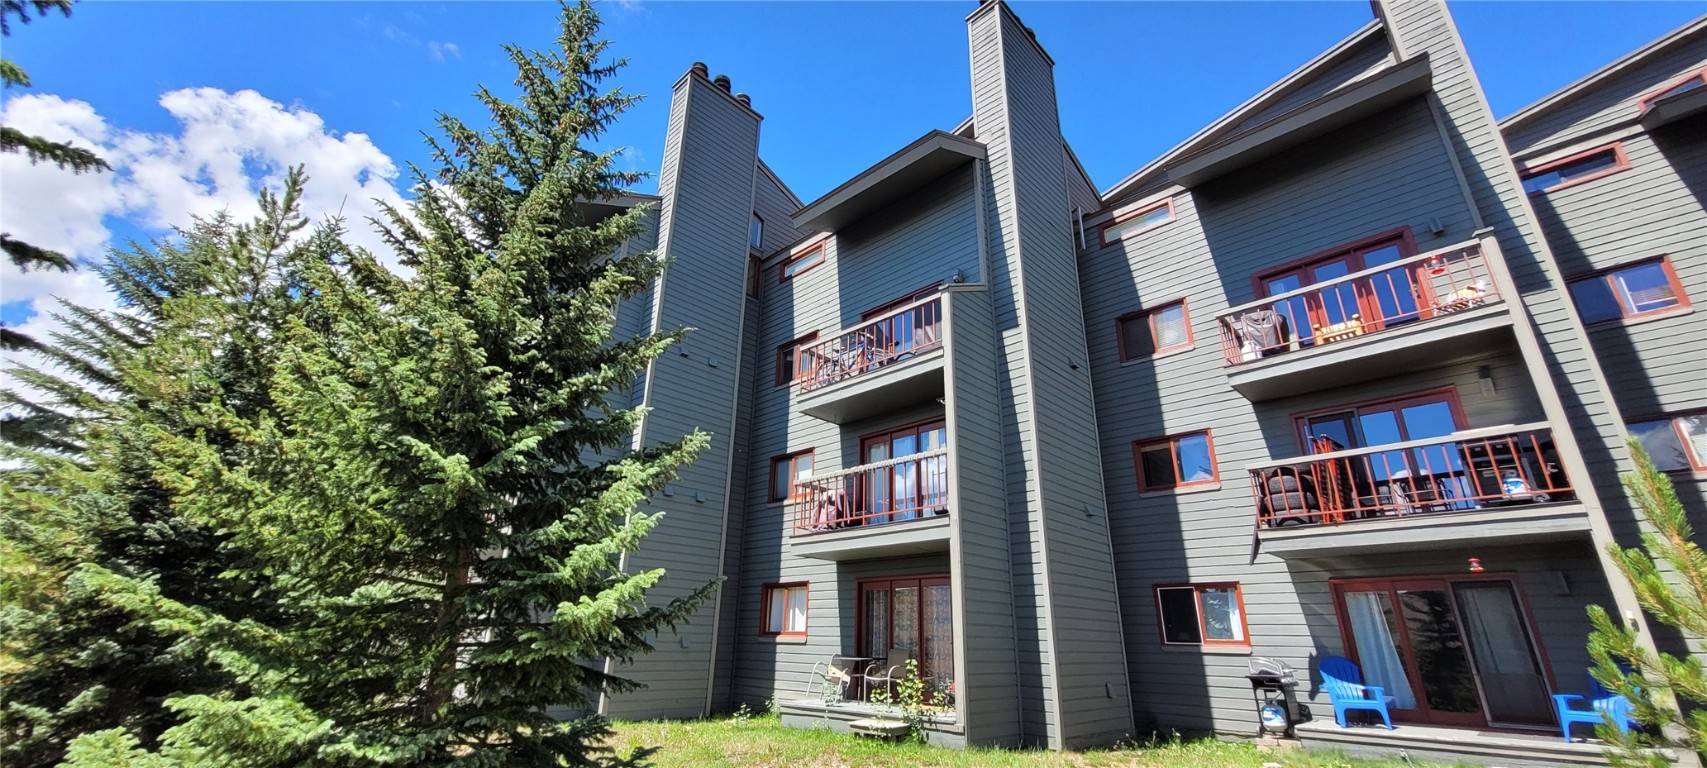 The fun starts here with this 2 bedroom and 2 bath South facing Snowscape Condo.